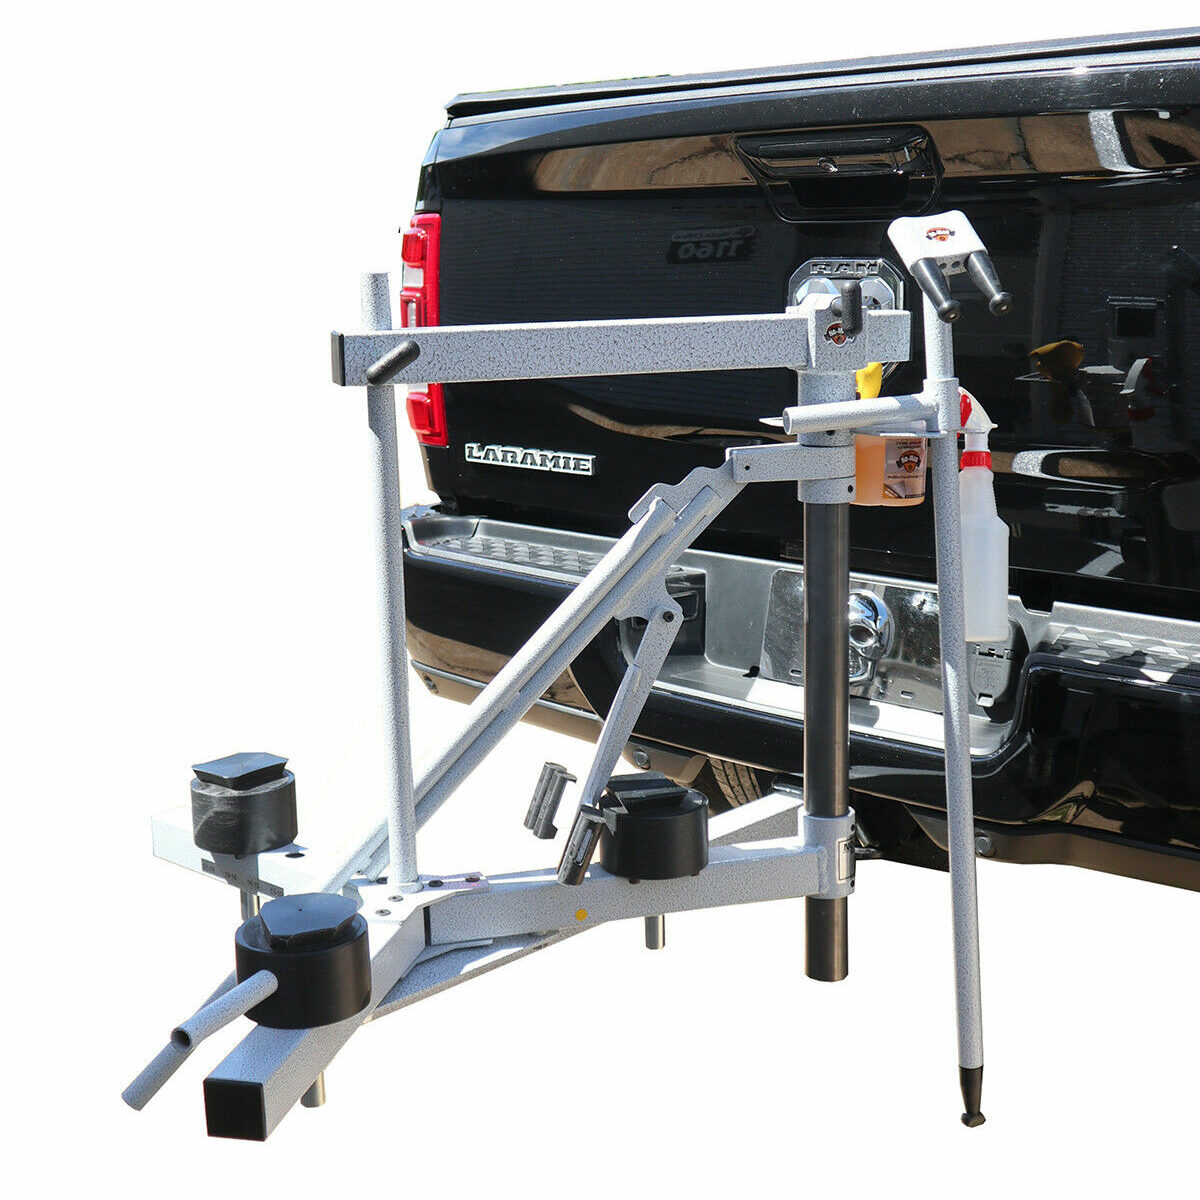 A No-Mar Tire Changer mounted on a tow hitch receiver. Photo courtesy No-Mar Tire Changer.